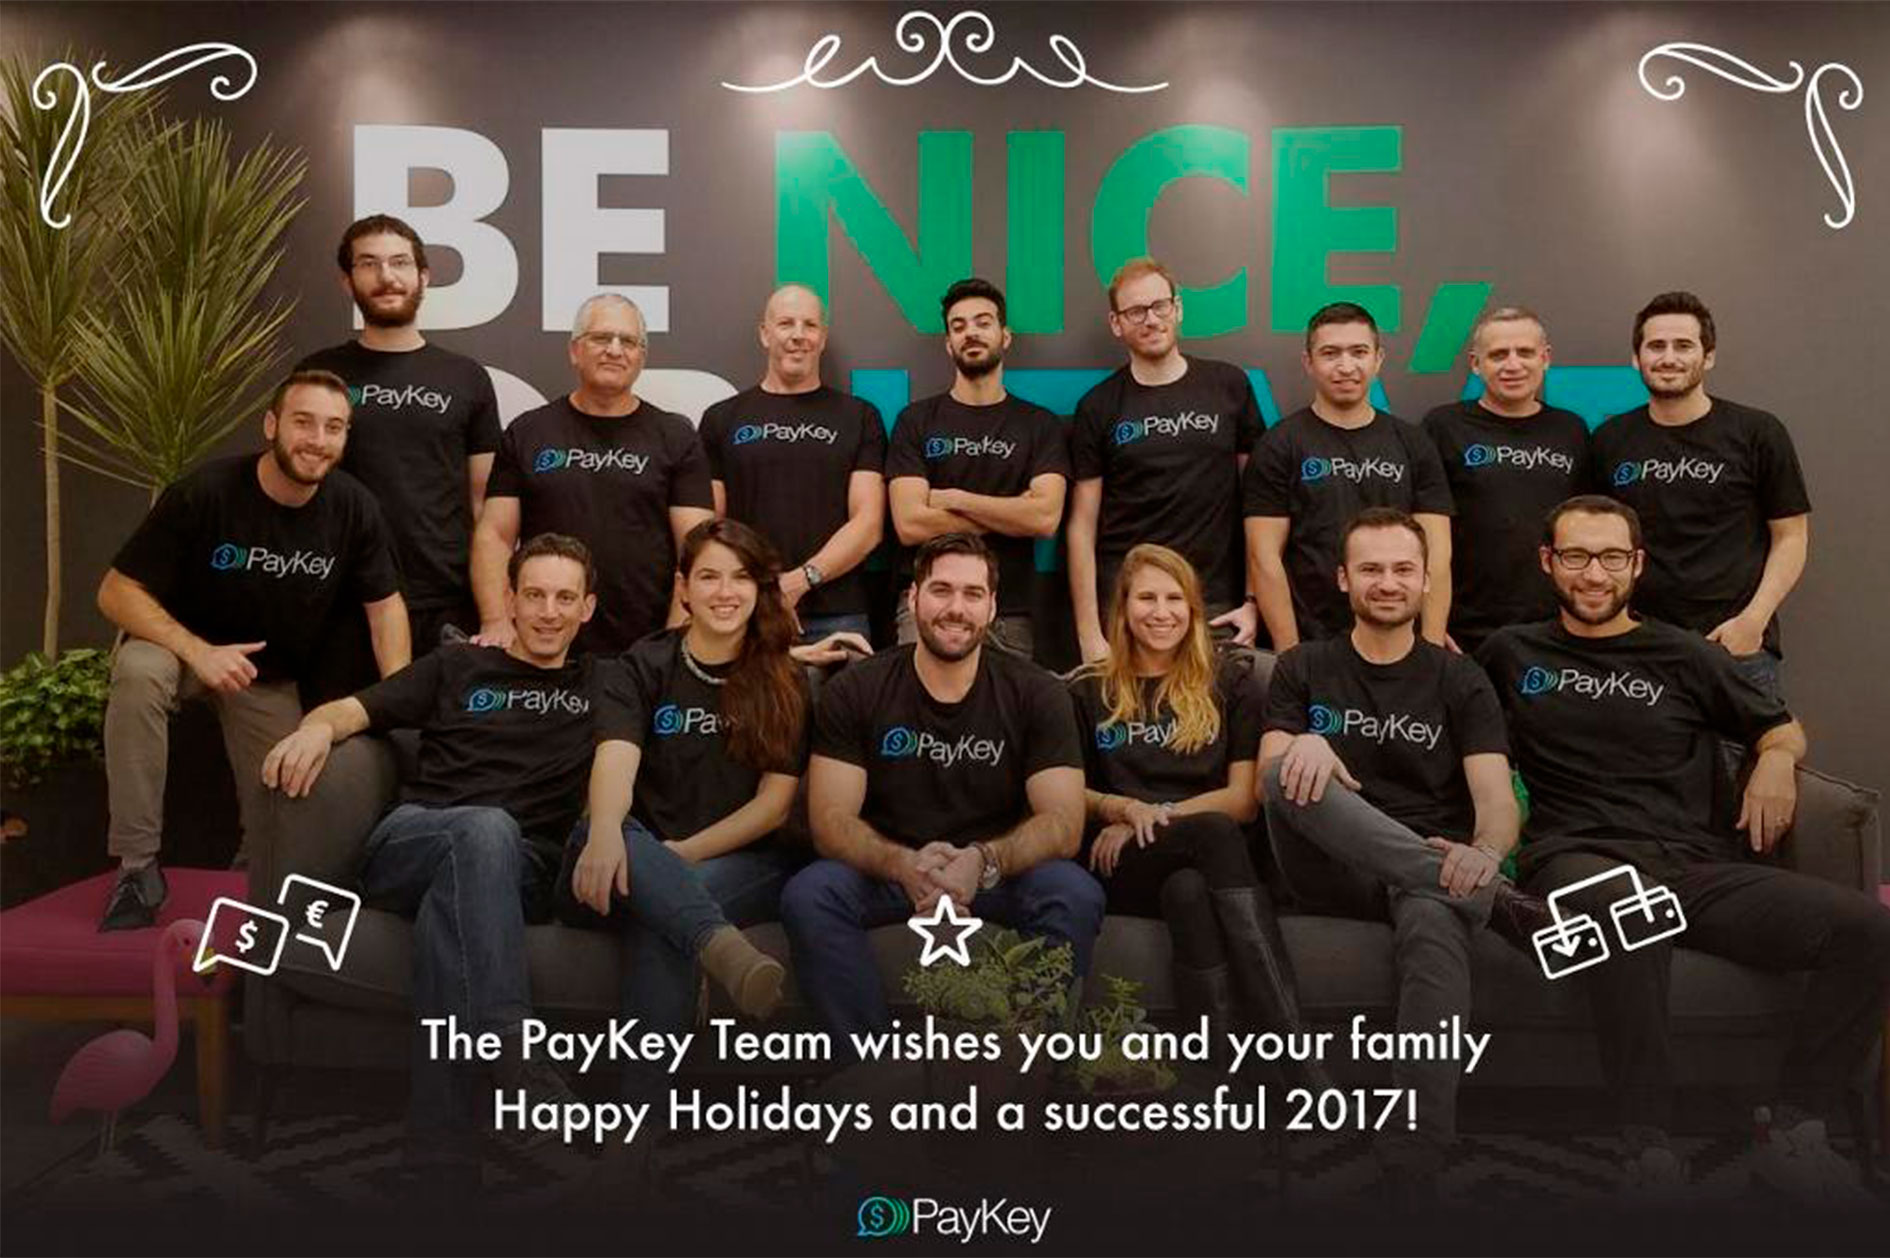 Equipe PayKey